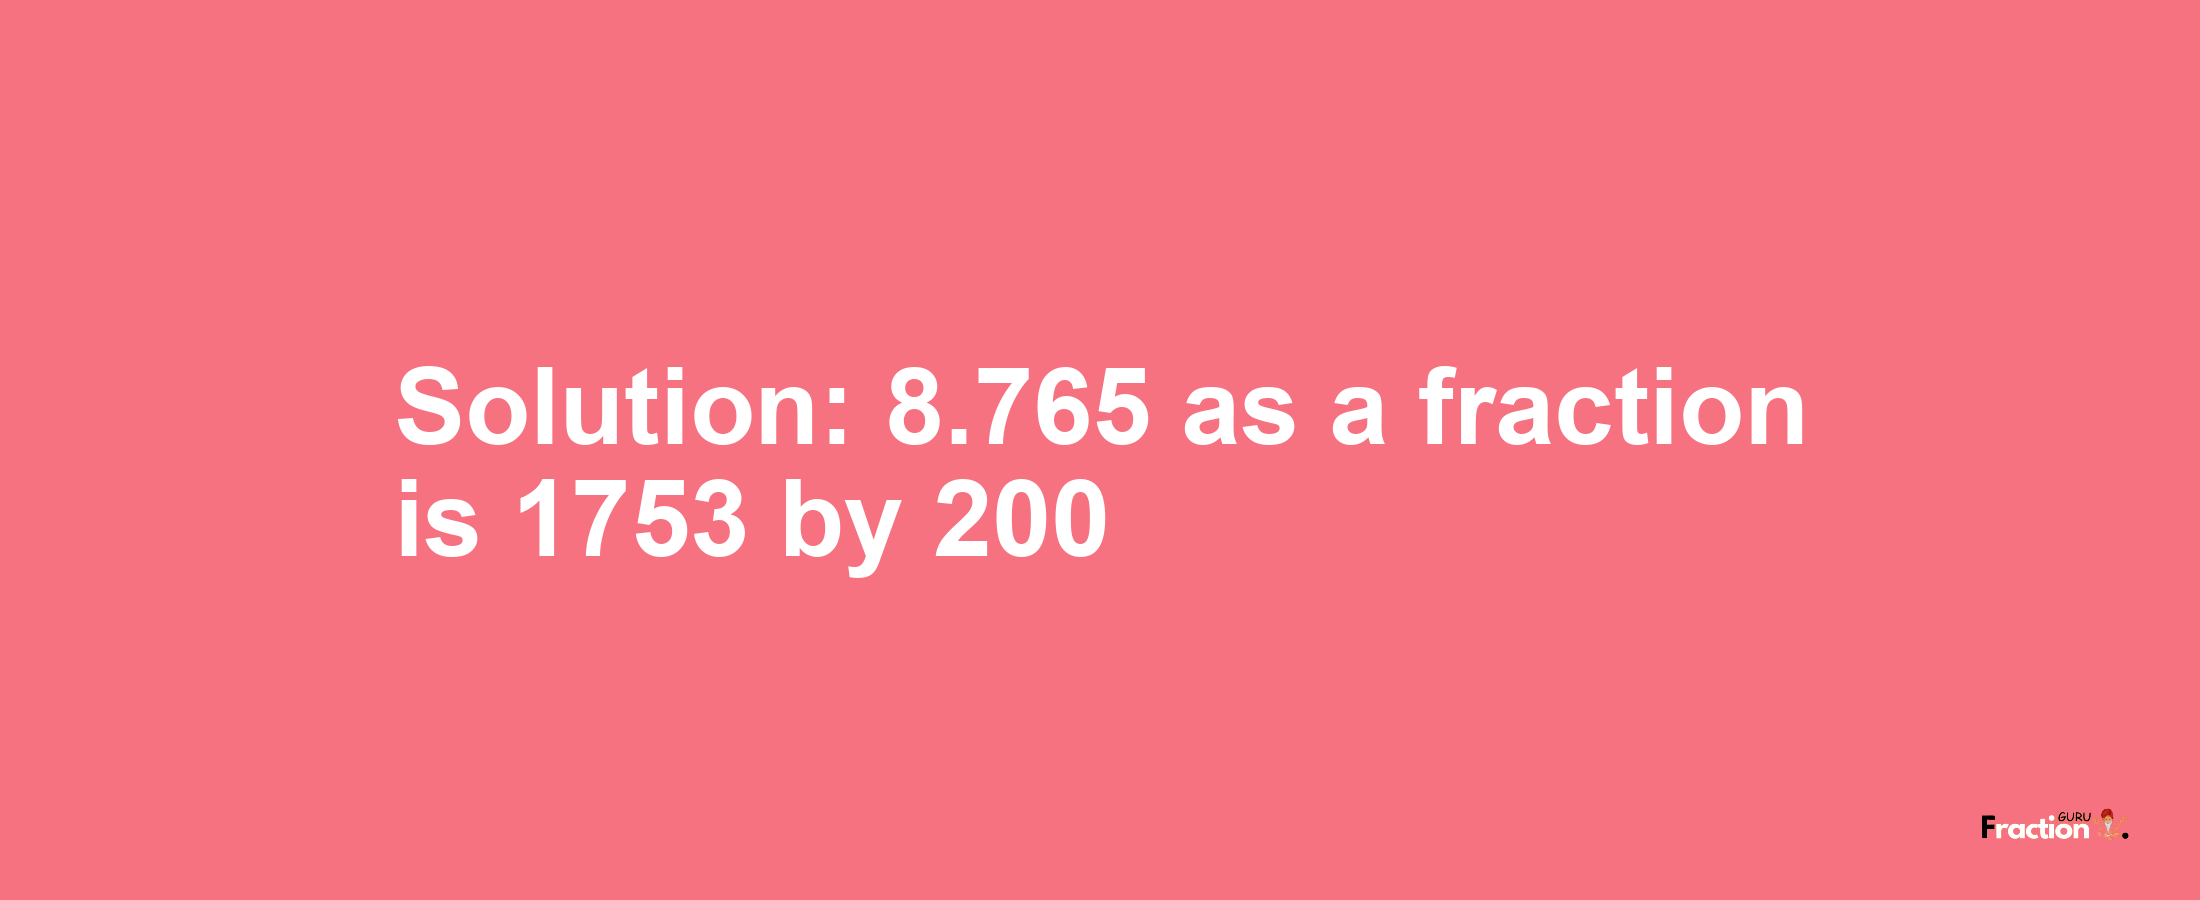 Solution:8.765 as a fraction is 1753/200